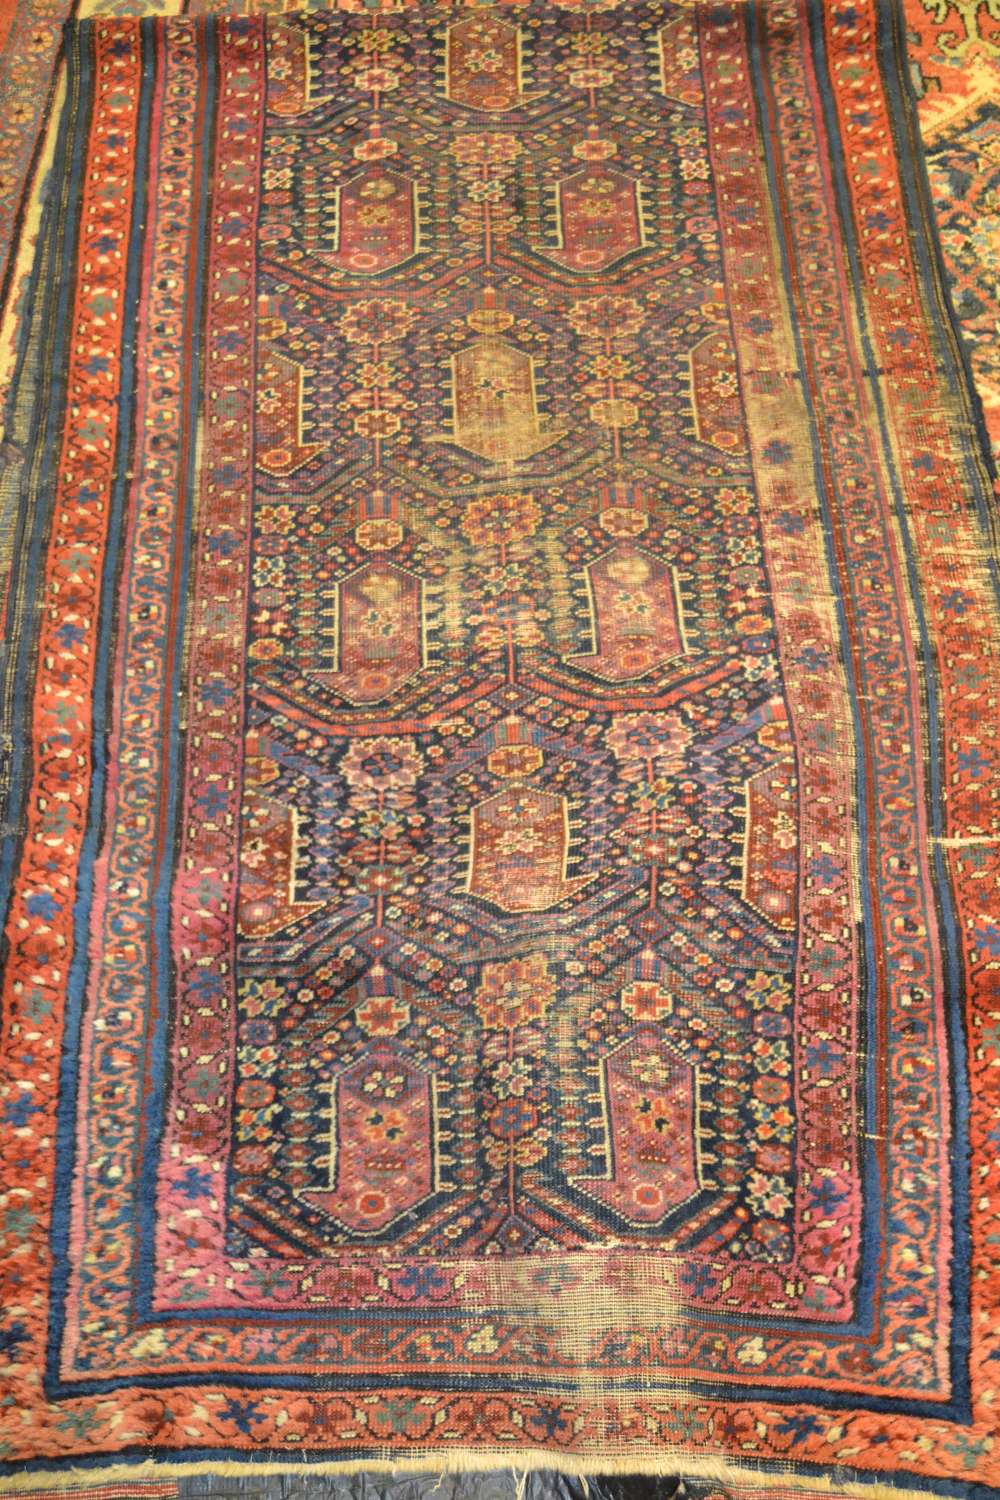 Hamadan runner with a repeating Boteh design on blue ground with borders (worn), 303cms x 89cms